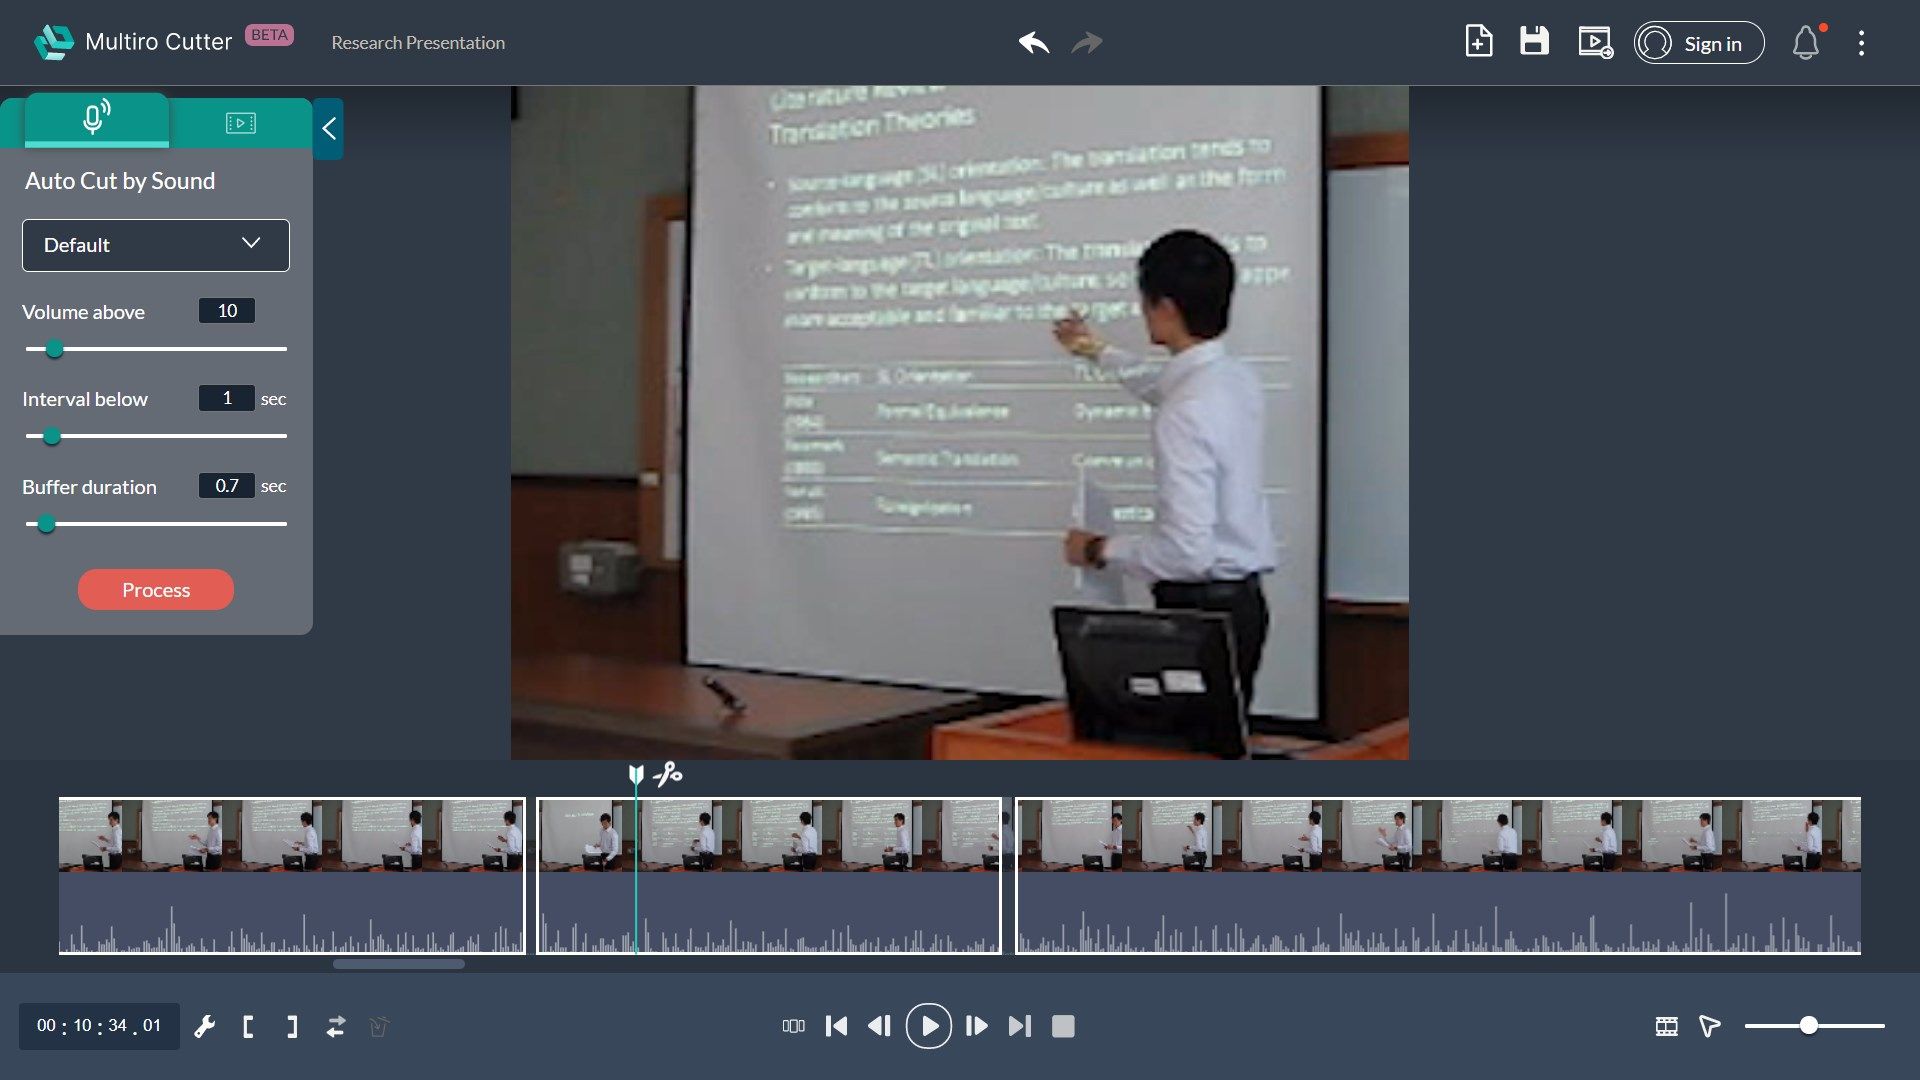 Automatically mark the scenes with noticeable sounds in a presentation or speech.